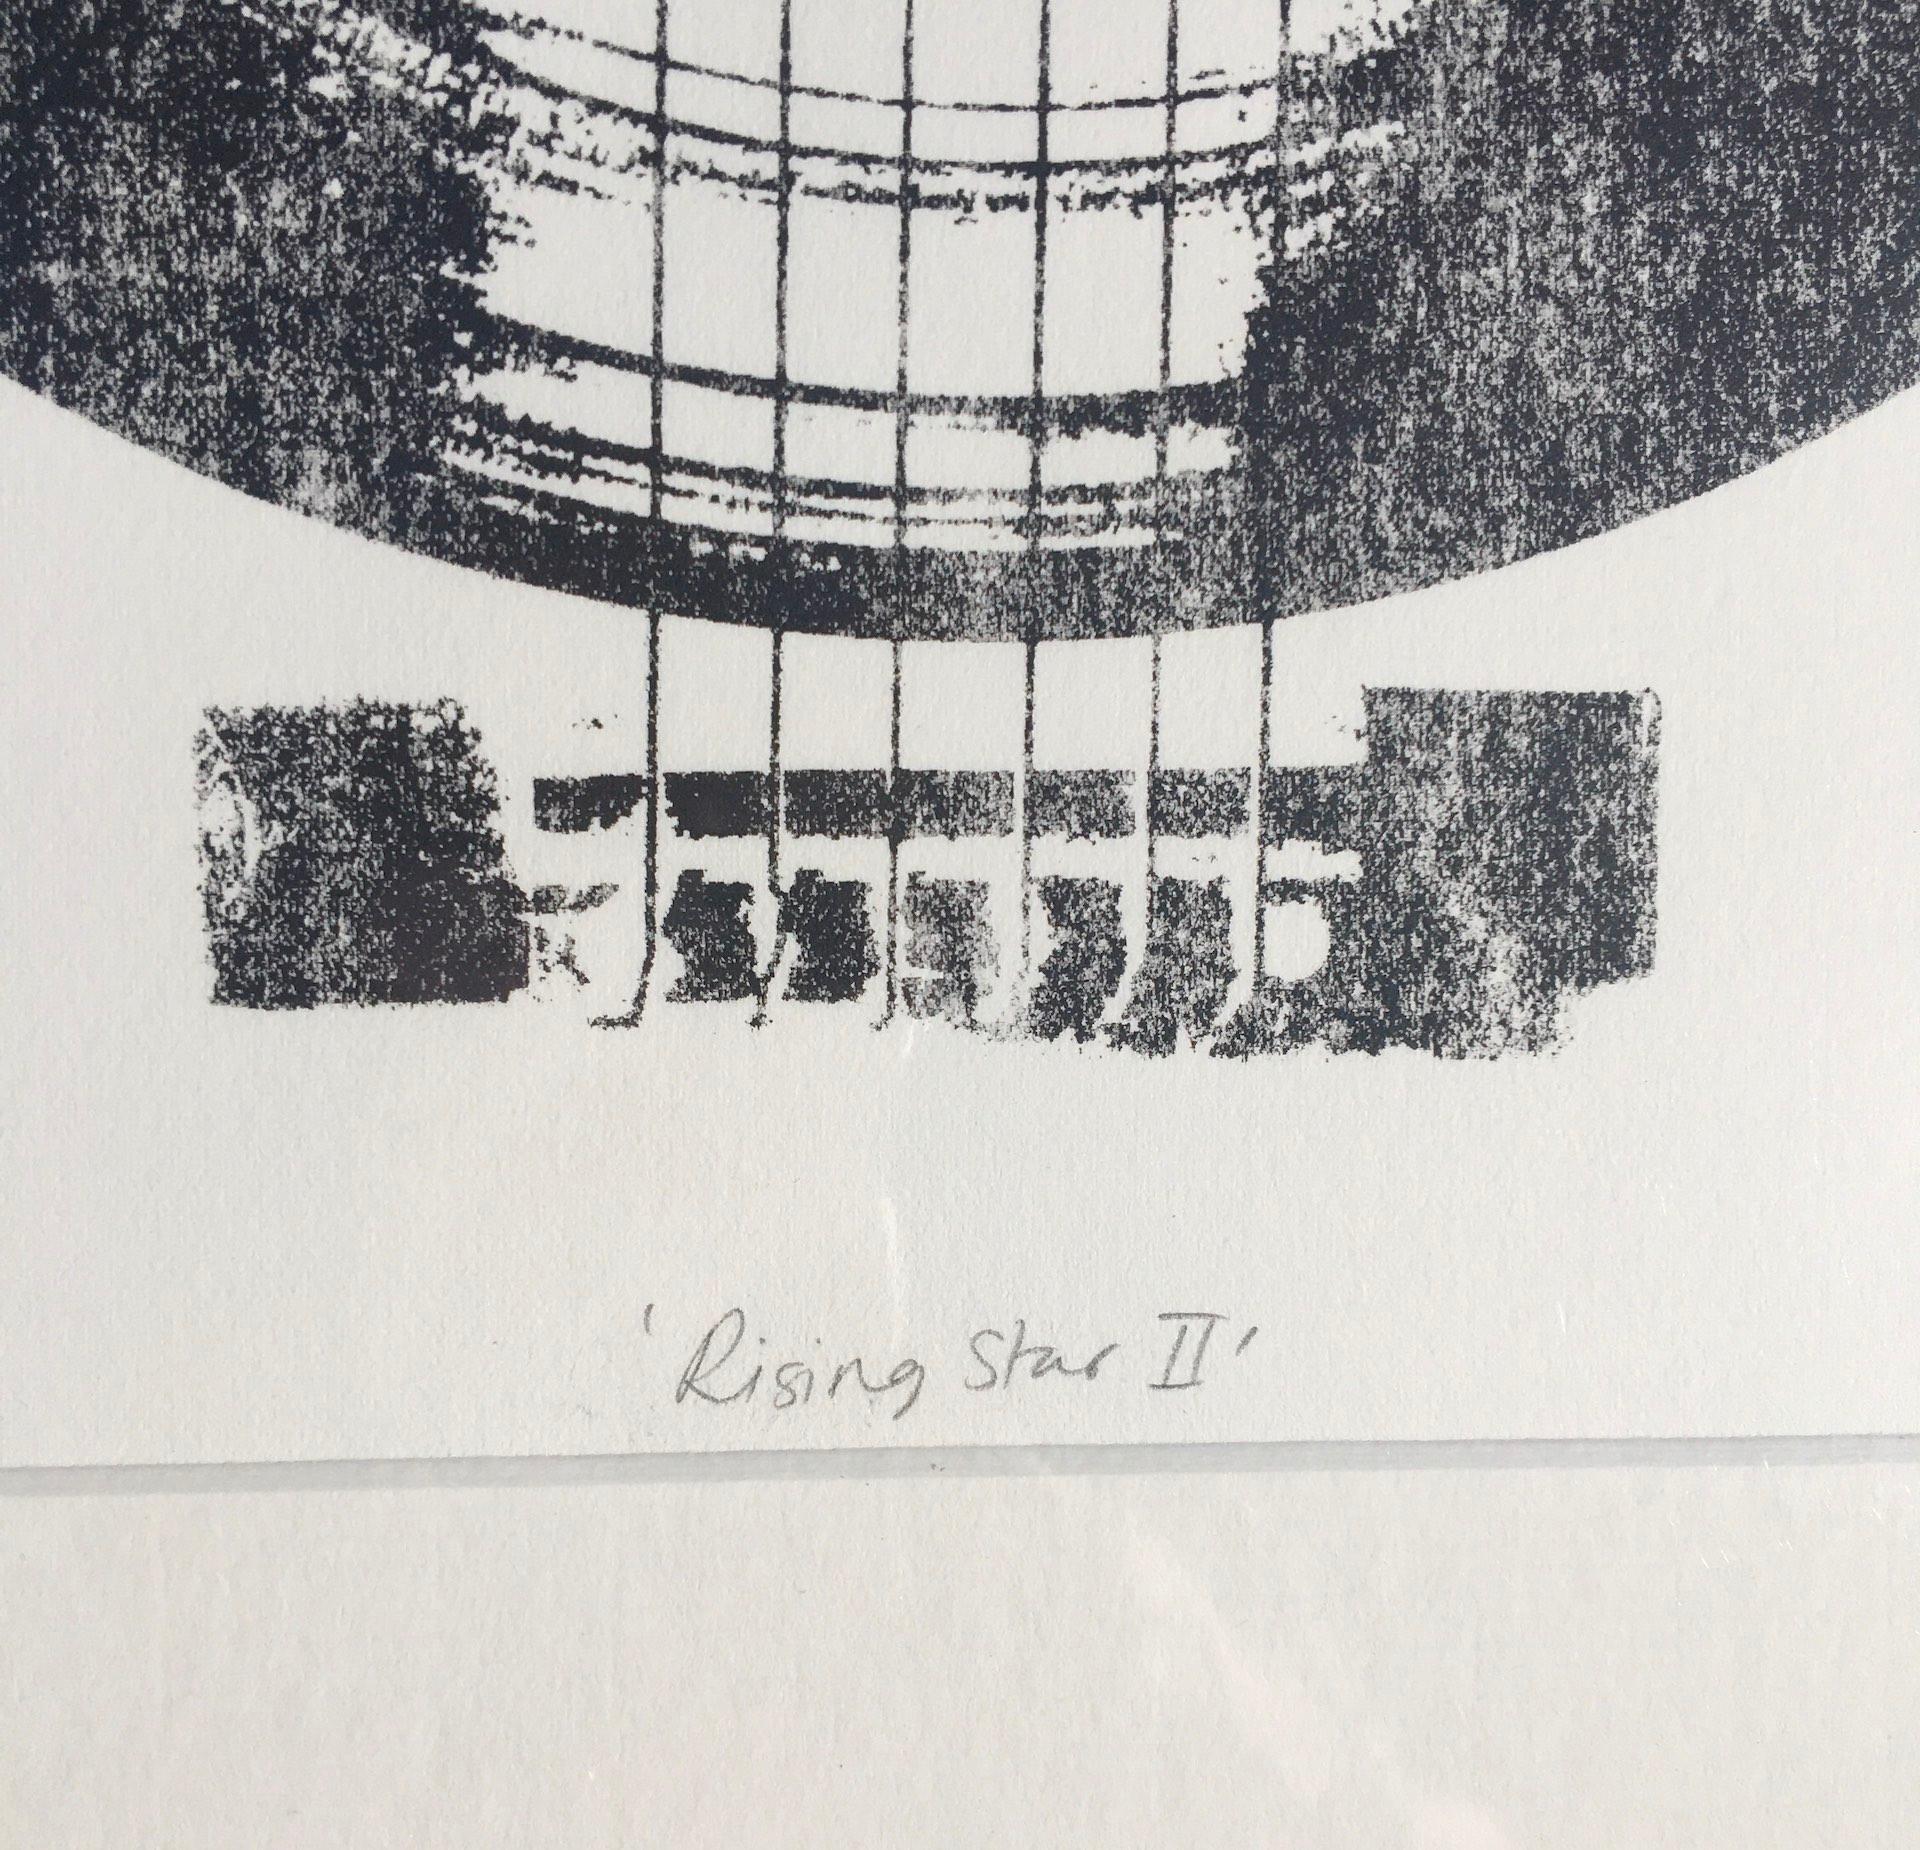 Rising Star II by Katie Edwards Illustrations.
5 colour original silkscreen print on Fabriano edition of 100.
Image Size – A3 – 29.7 x 42 cm.
Mounted size is 40.5 cm x 50.5 cm.

This screen print was commissioned by Listen Music Magazine,